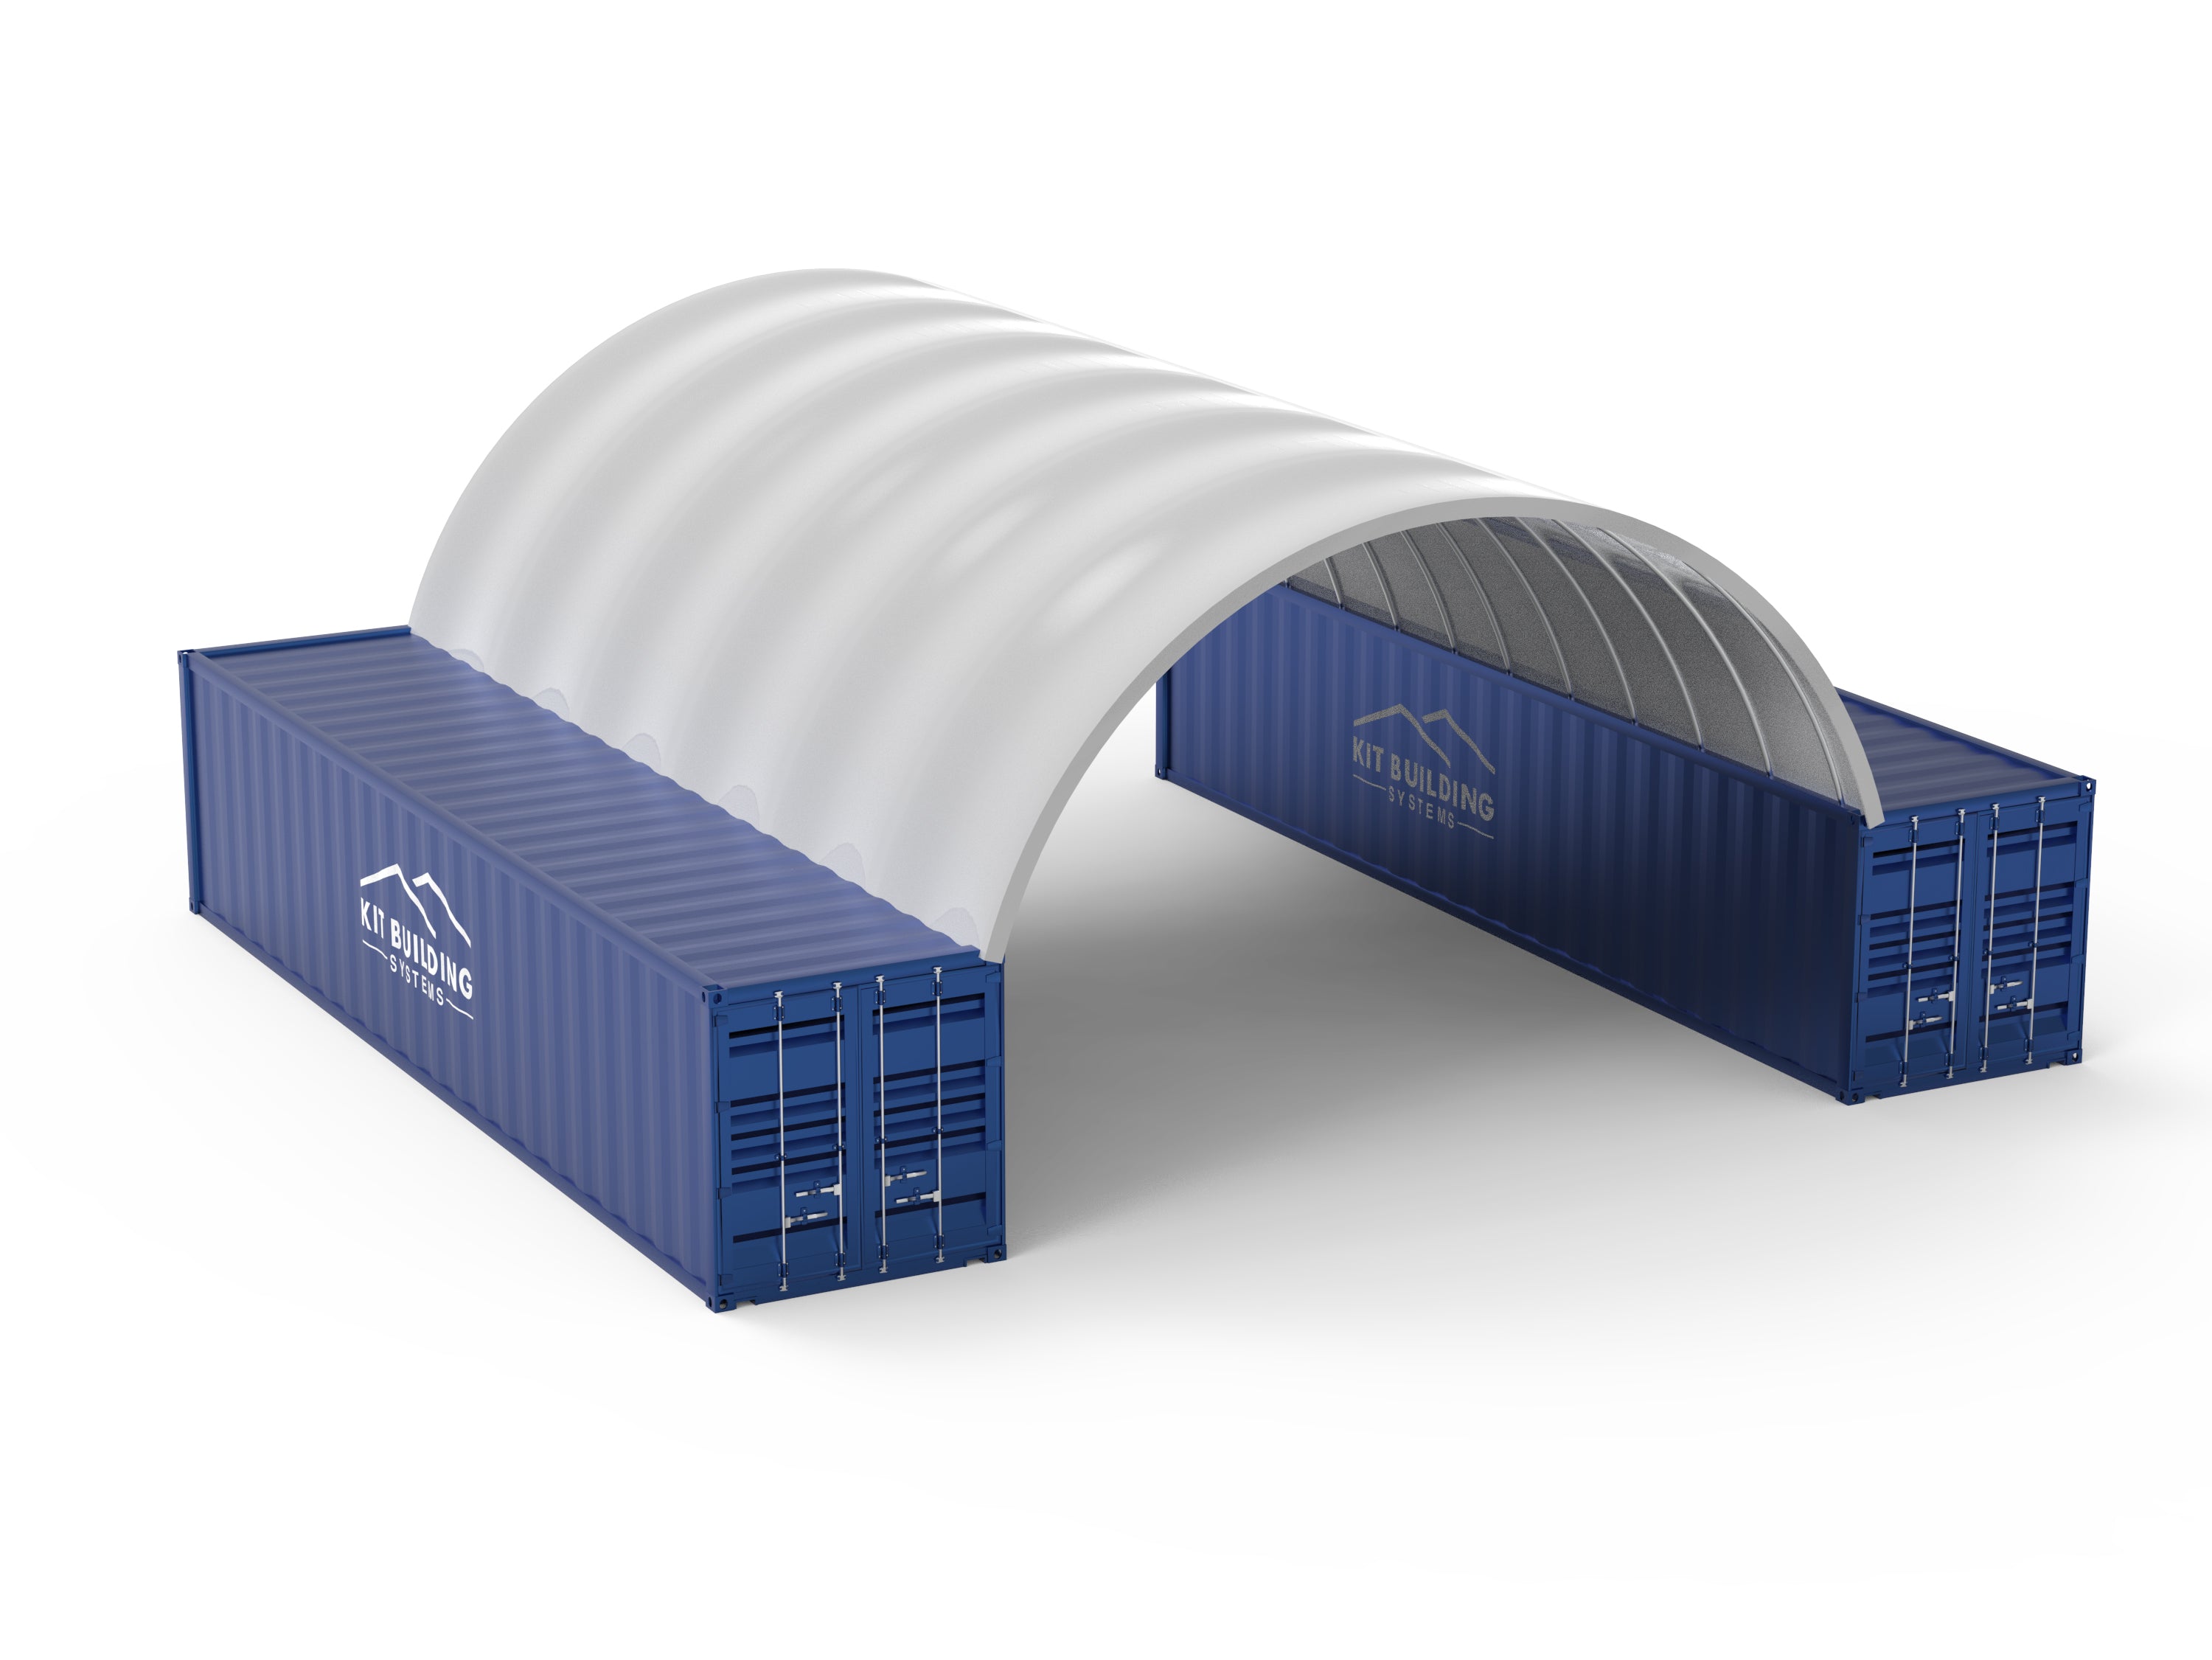 Containeropvang - 26ft x 40ft x 10ft (8m x 12m x 3m)